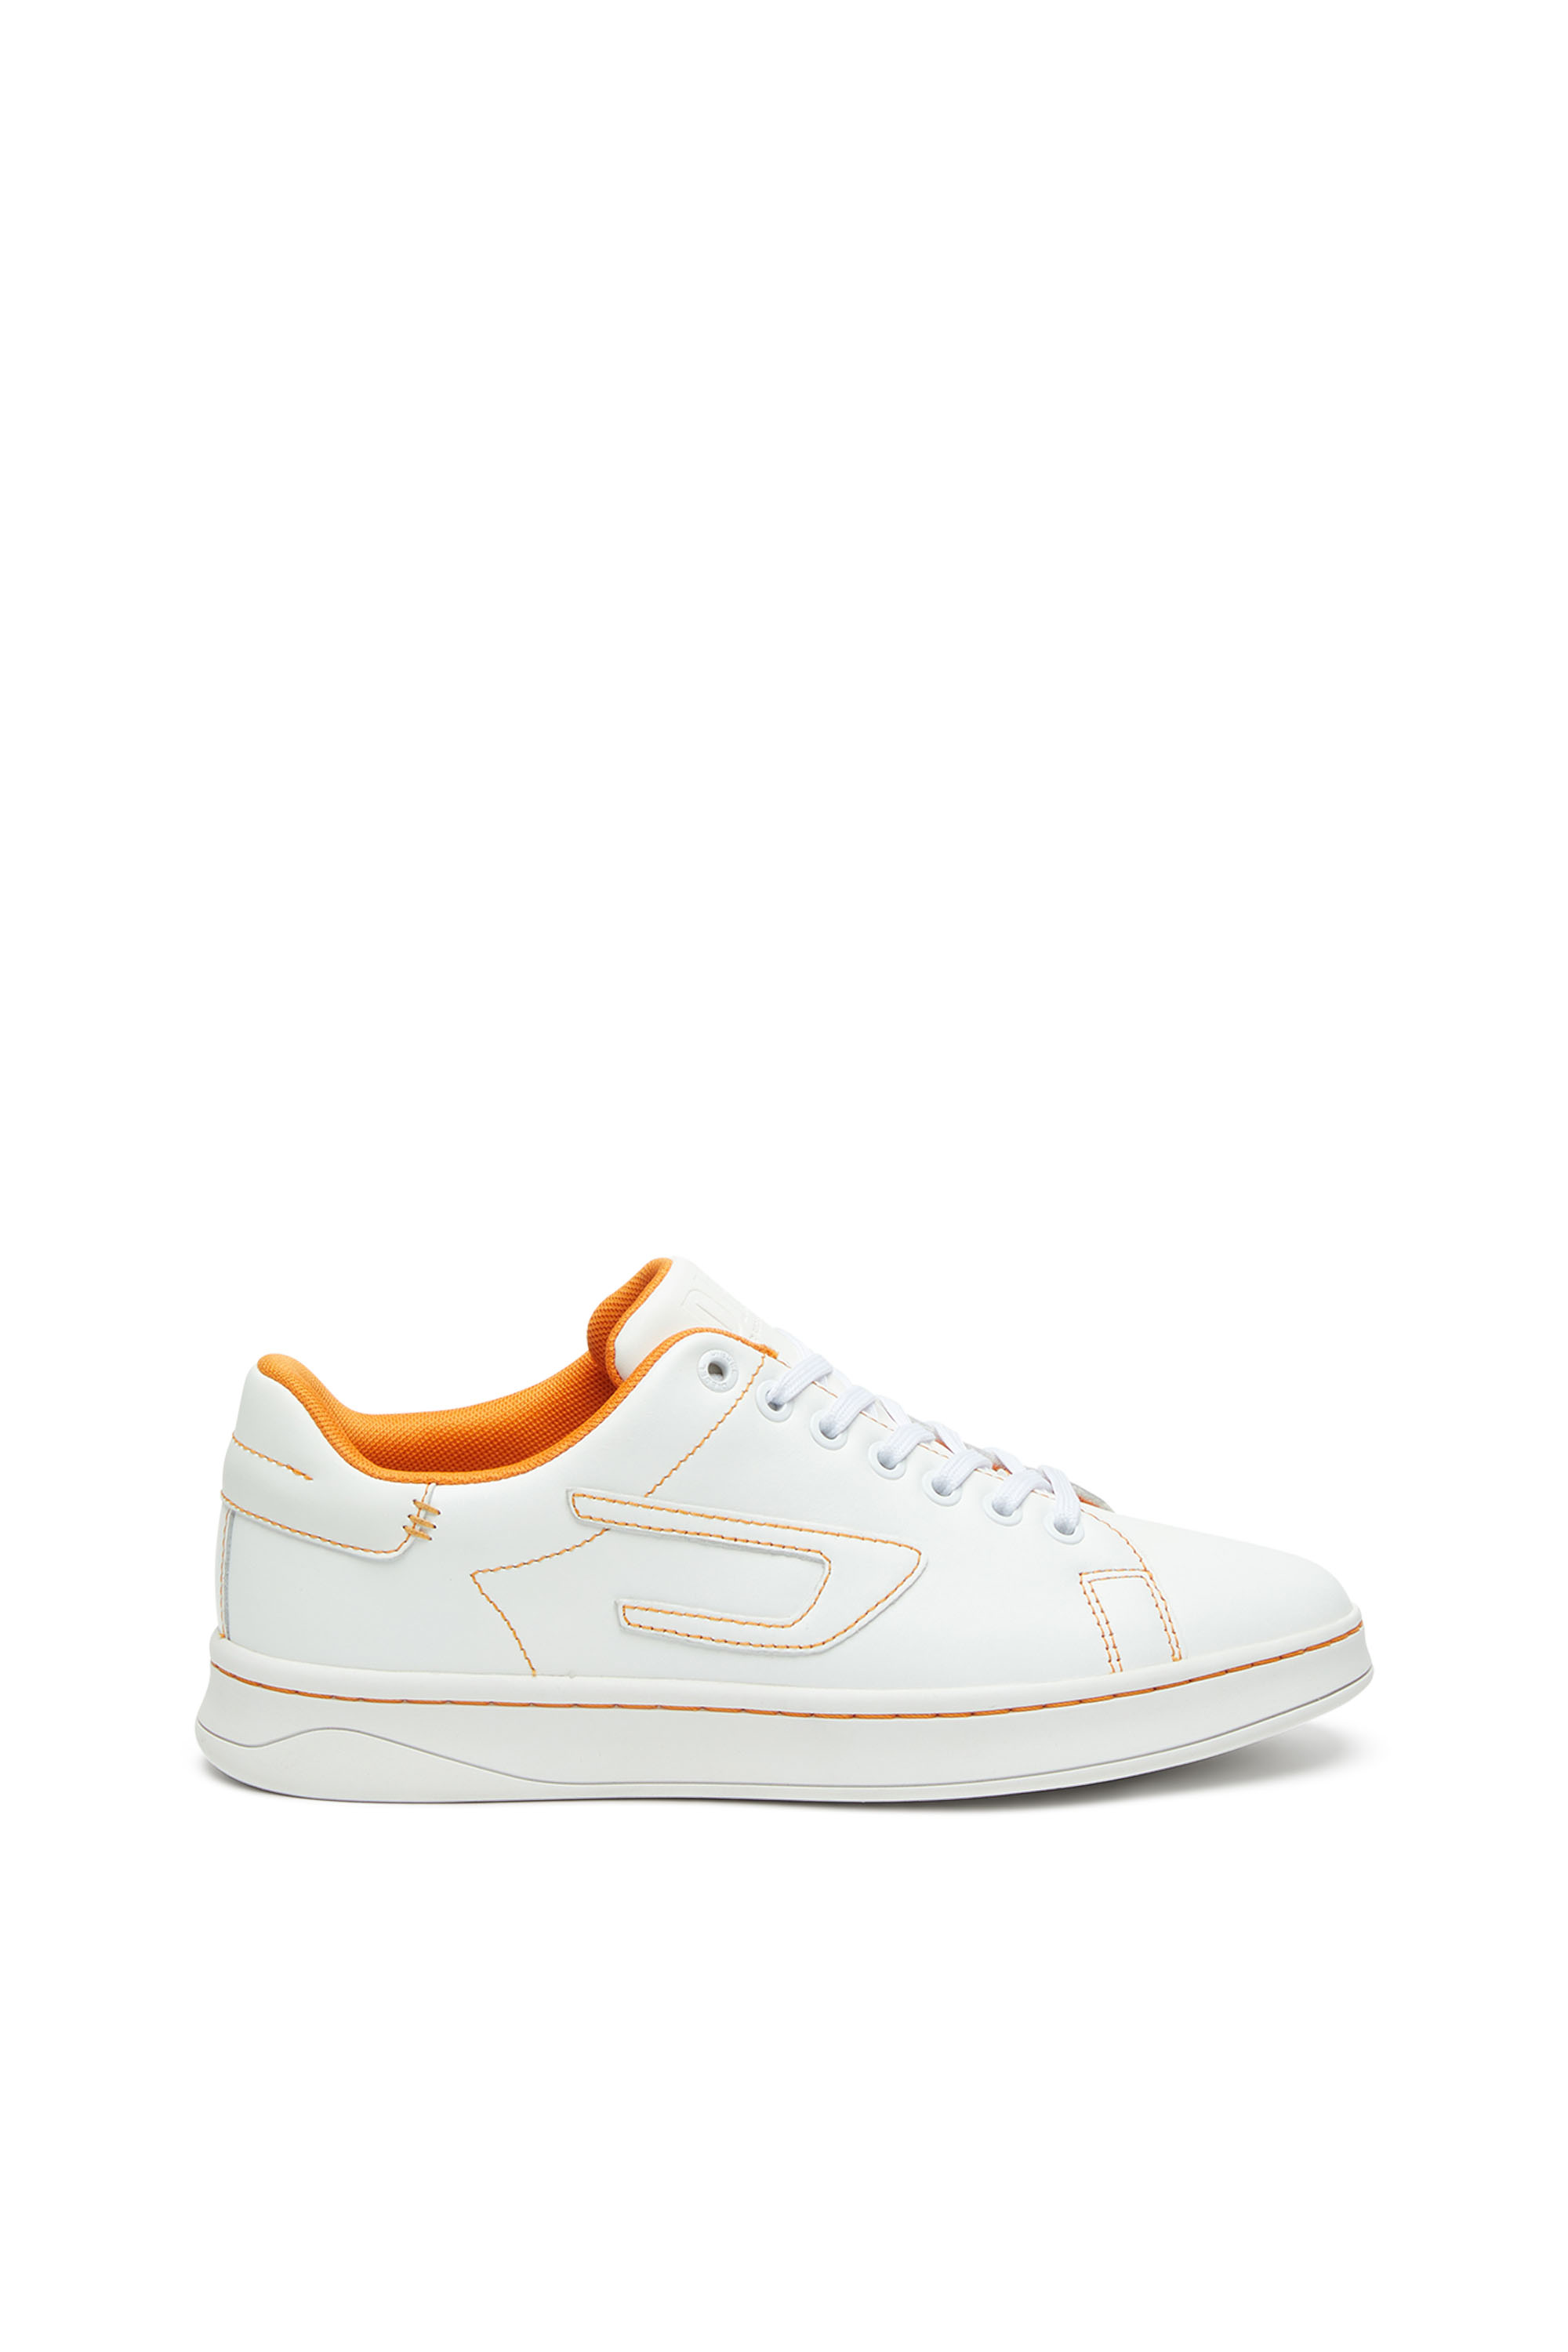 Diesel Sneakers With Contrast Stitching In White